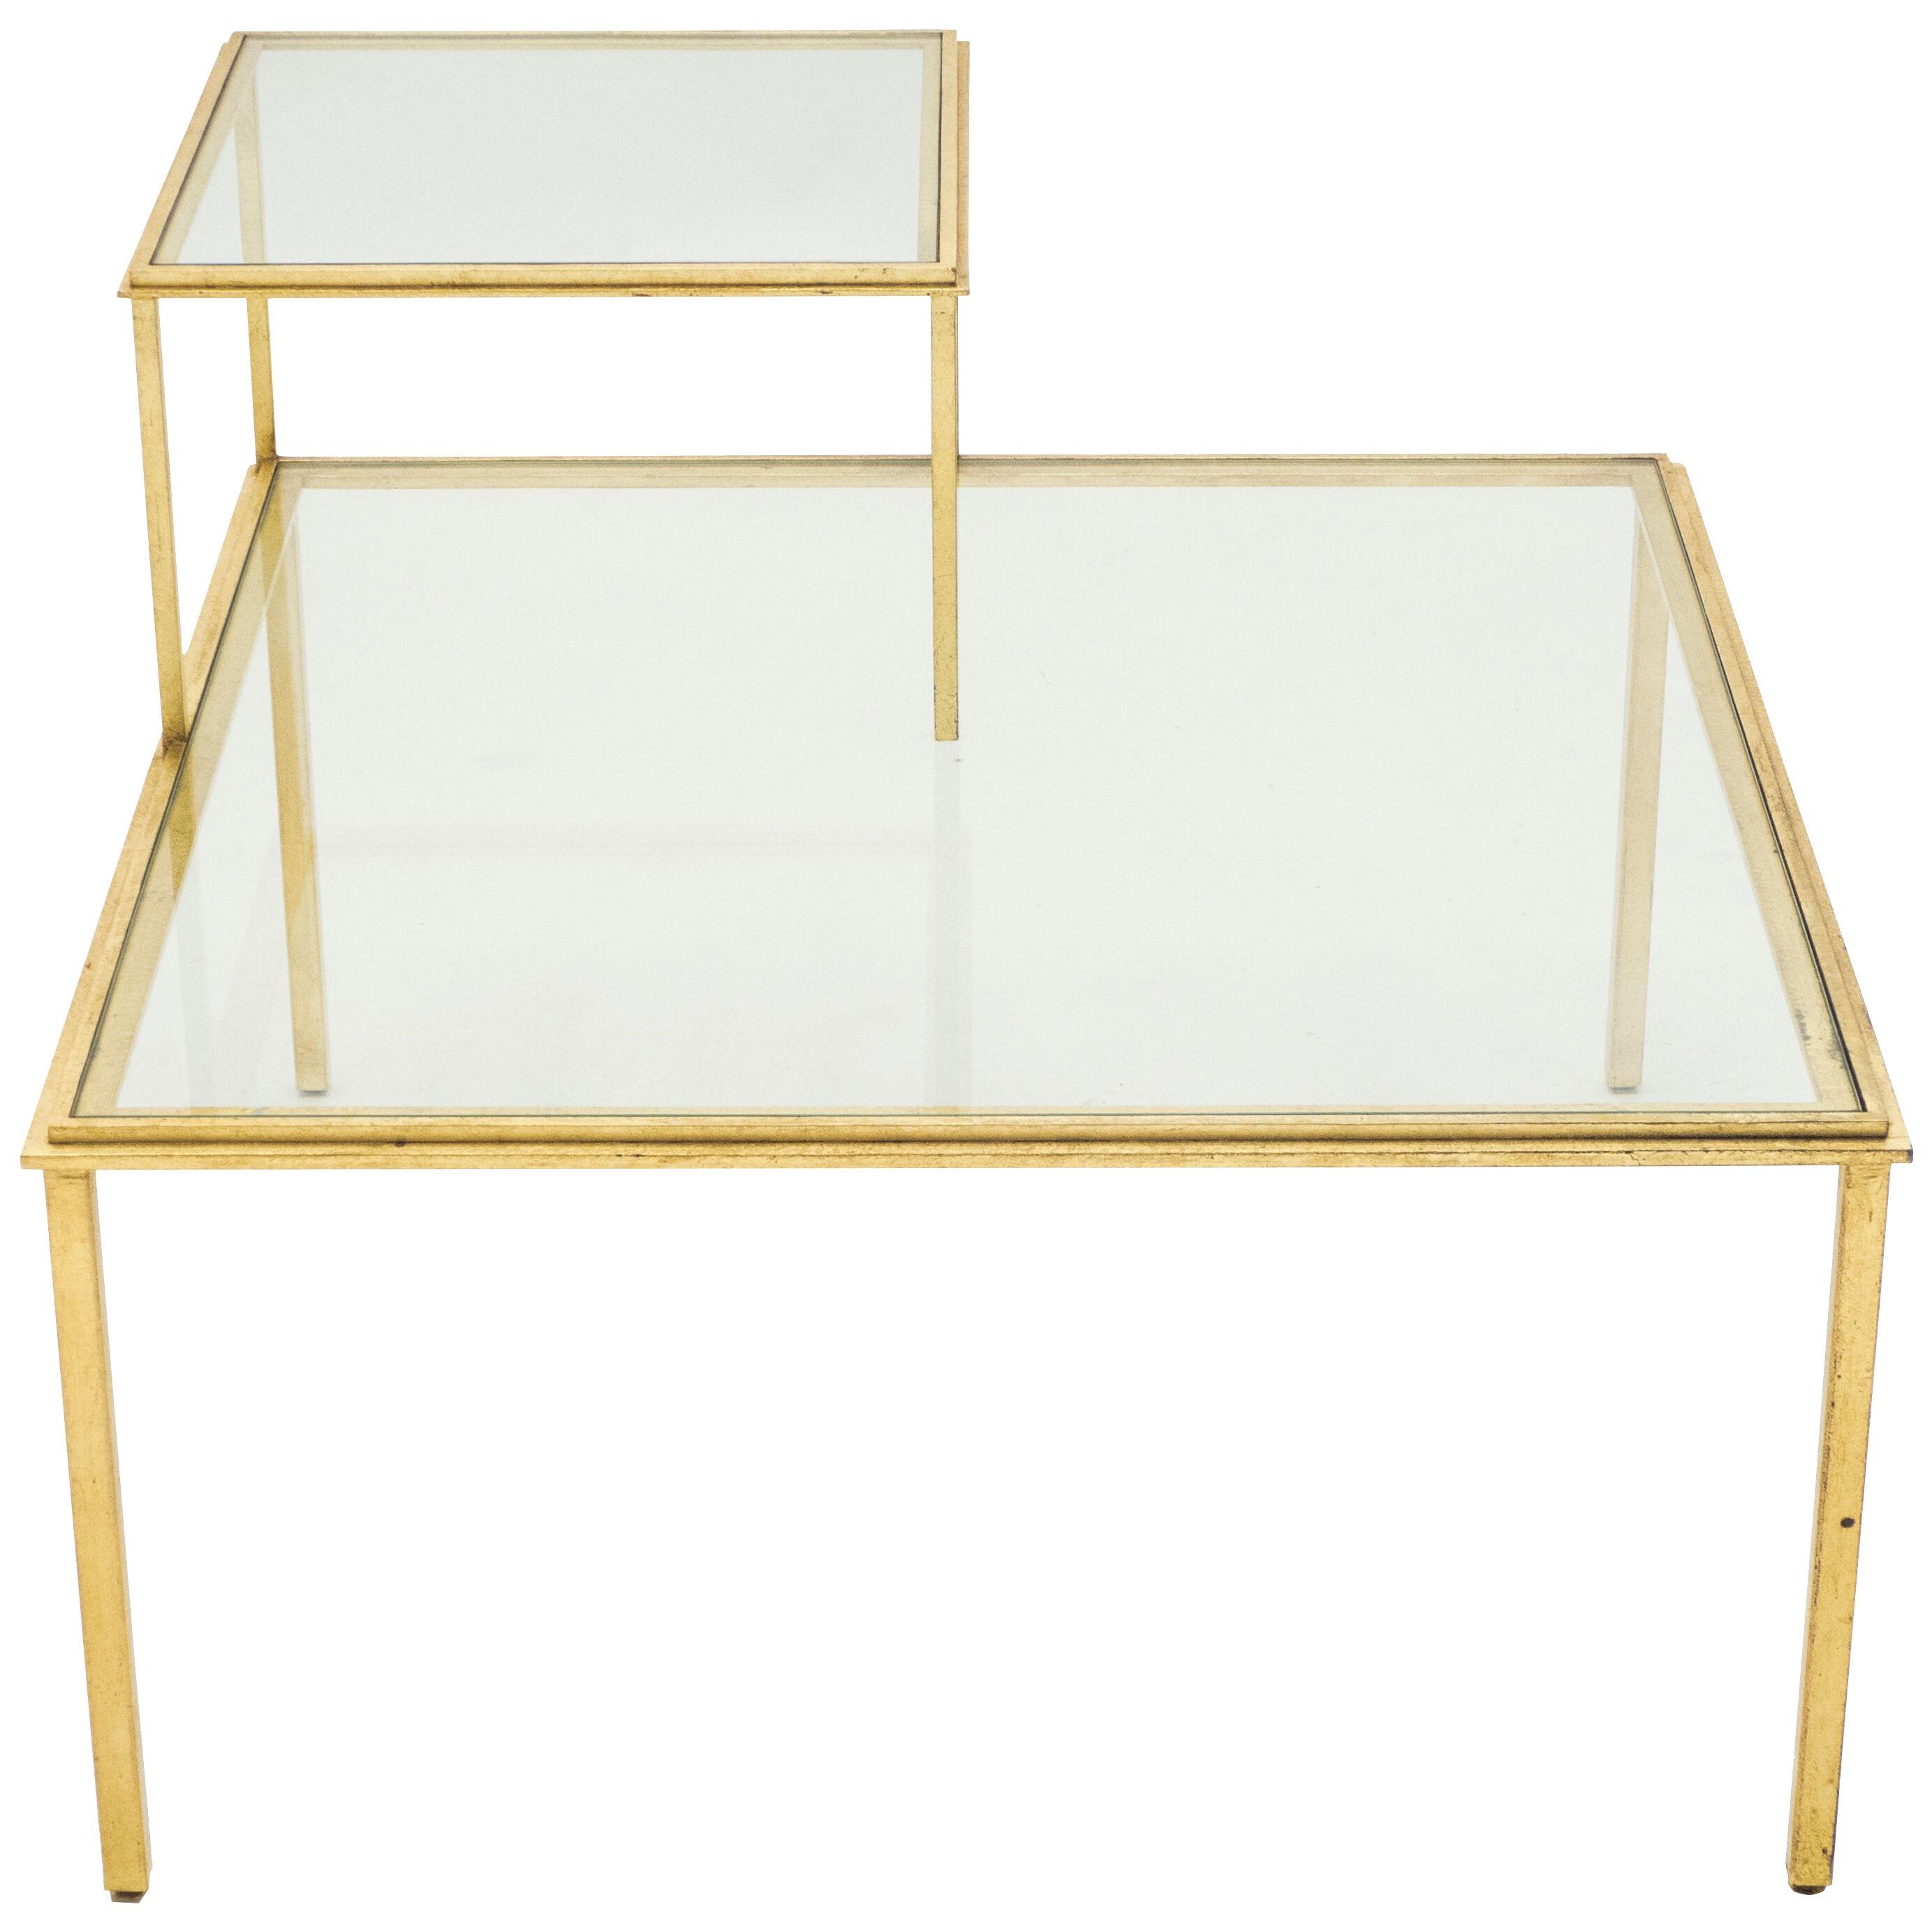 Roger Thibier Gilt Wrought Iron Glass Coffee or End Table, 1960s